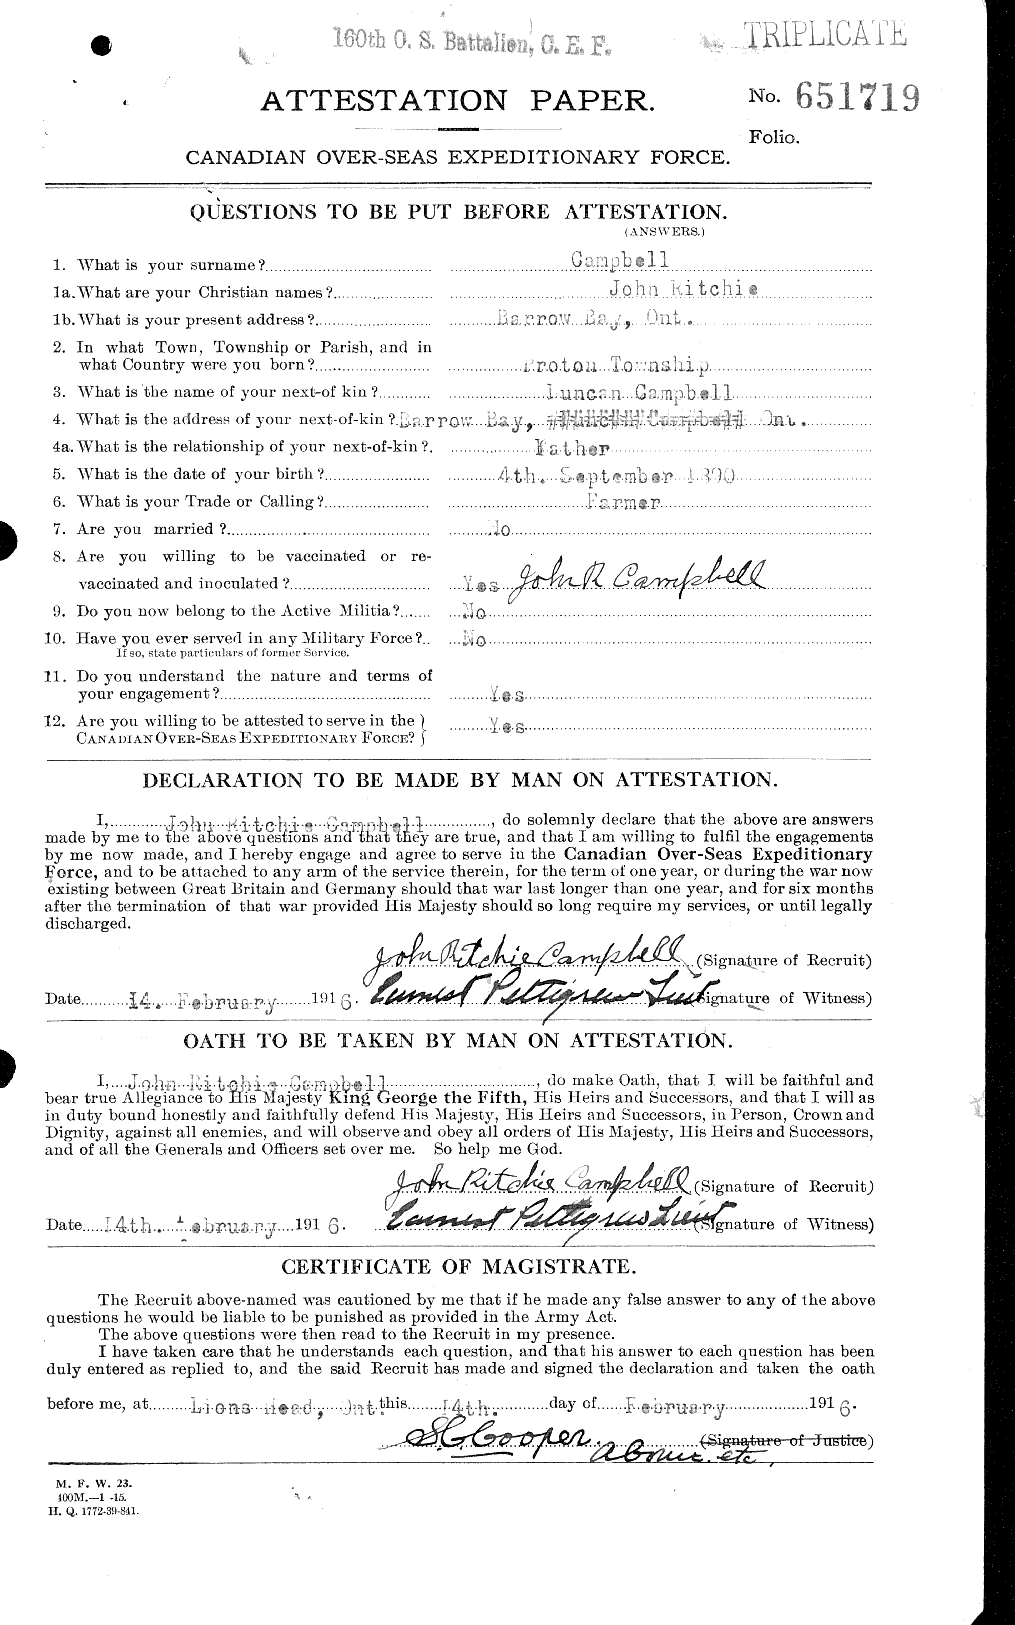 Personnel Records of the First World War - CEF 003777a